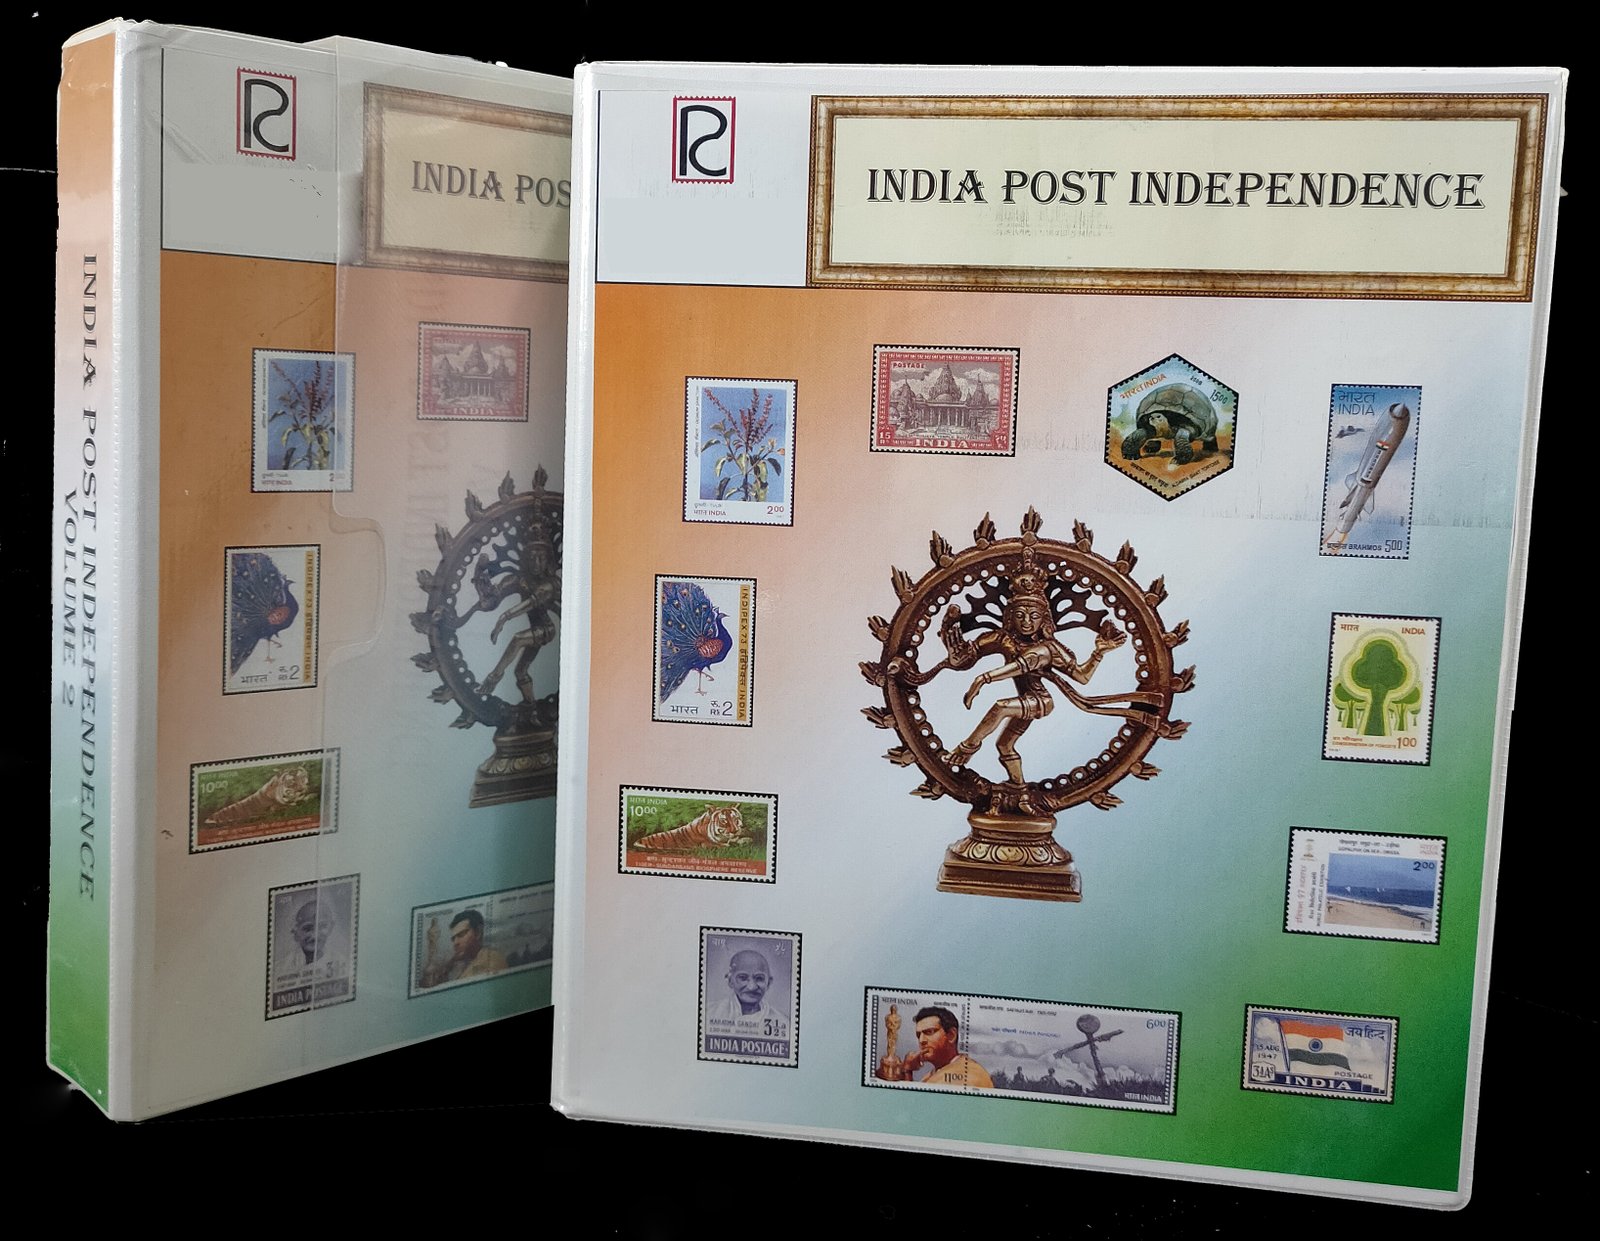 INDIA POST 1947-2019 including Definitive, Military Stamp Official 195 Pages-'B' Series�(ALBUM WITH ONLY ILLUSTRATIONS , STAMPS NOT INCLUDED WITH ALBUM)